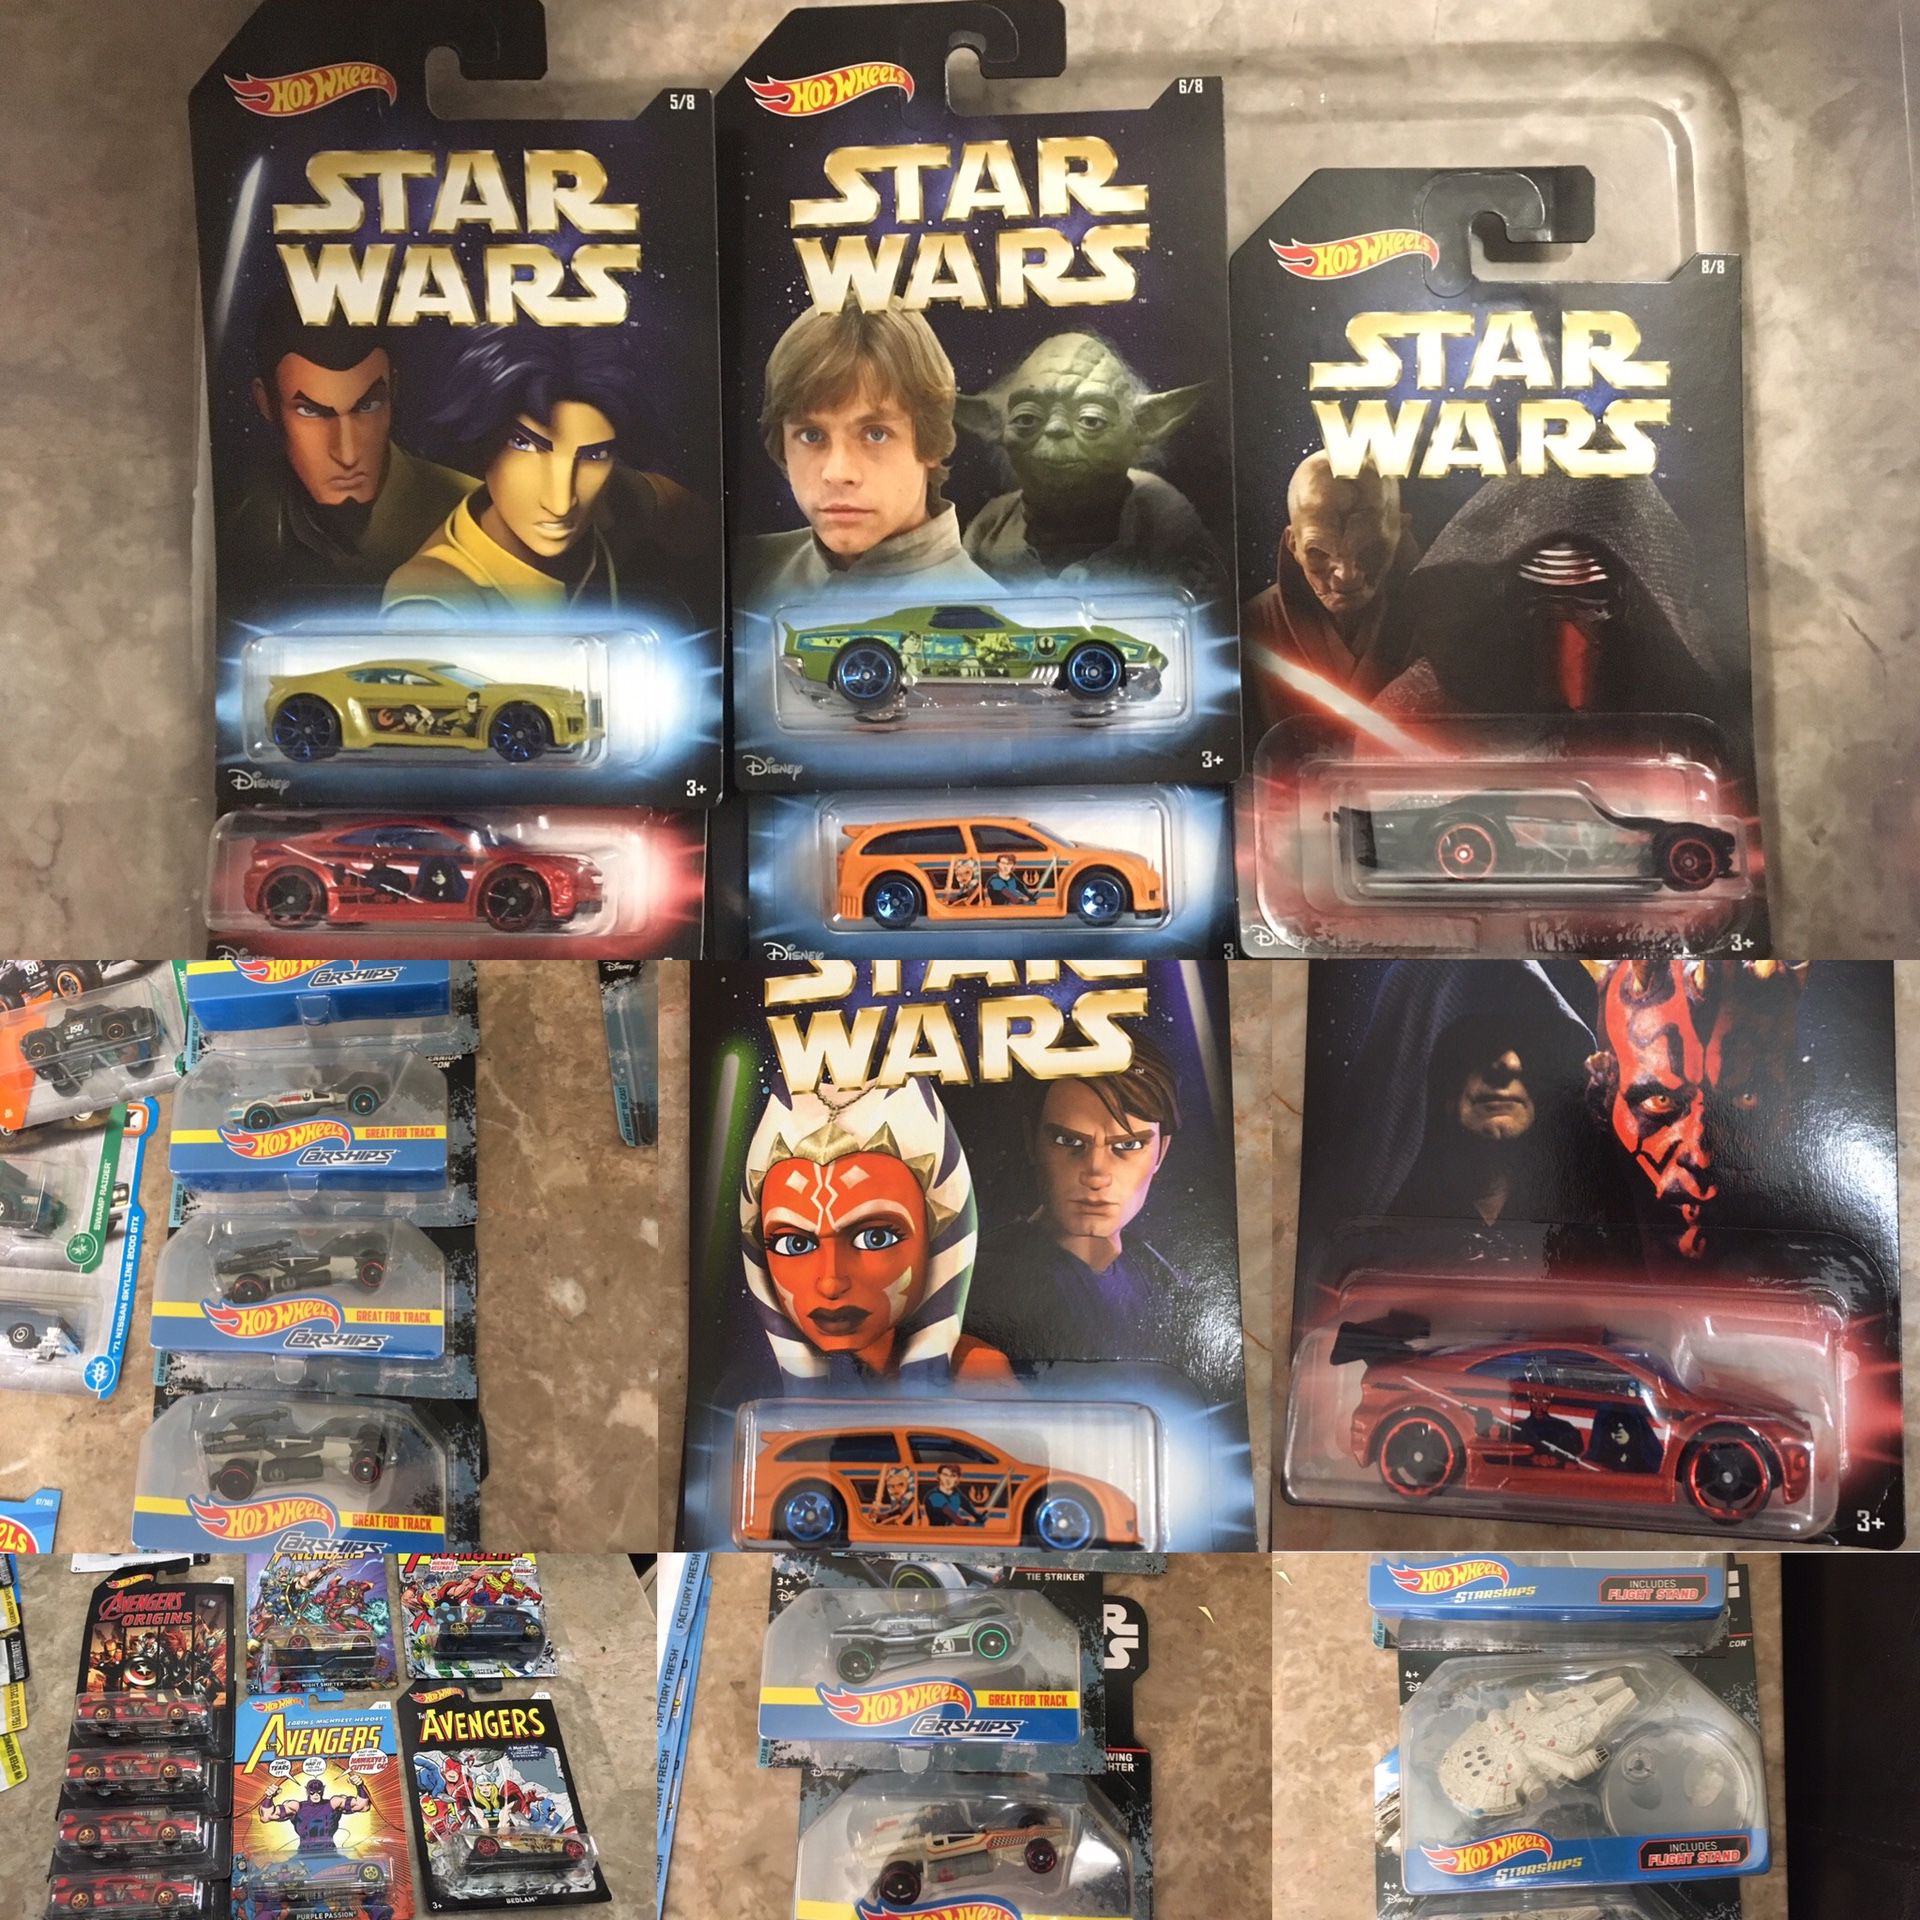 Hot wheels Disney Star Wars avengers marvel collectible die cast toy cars $2 ea